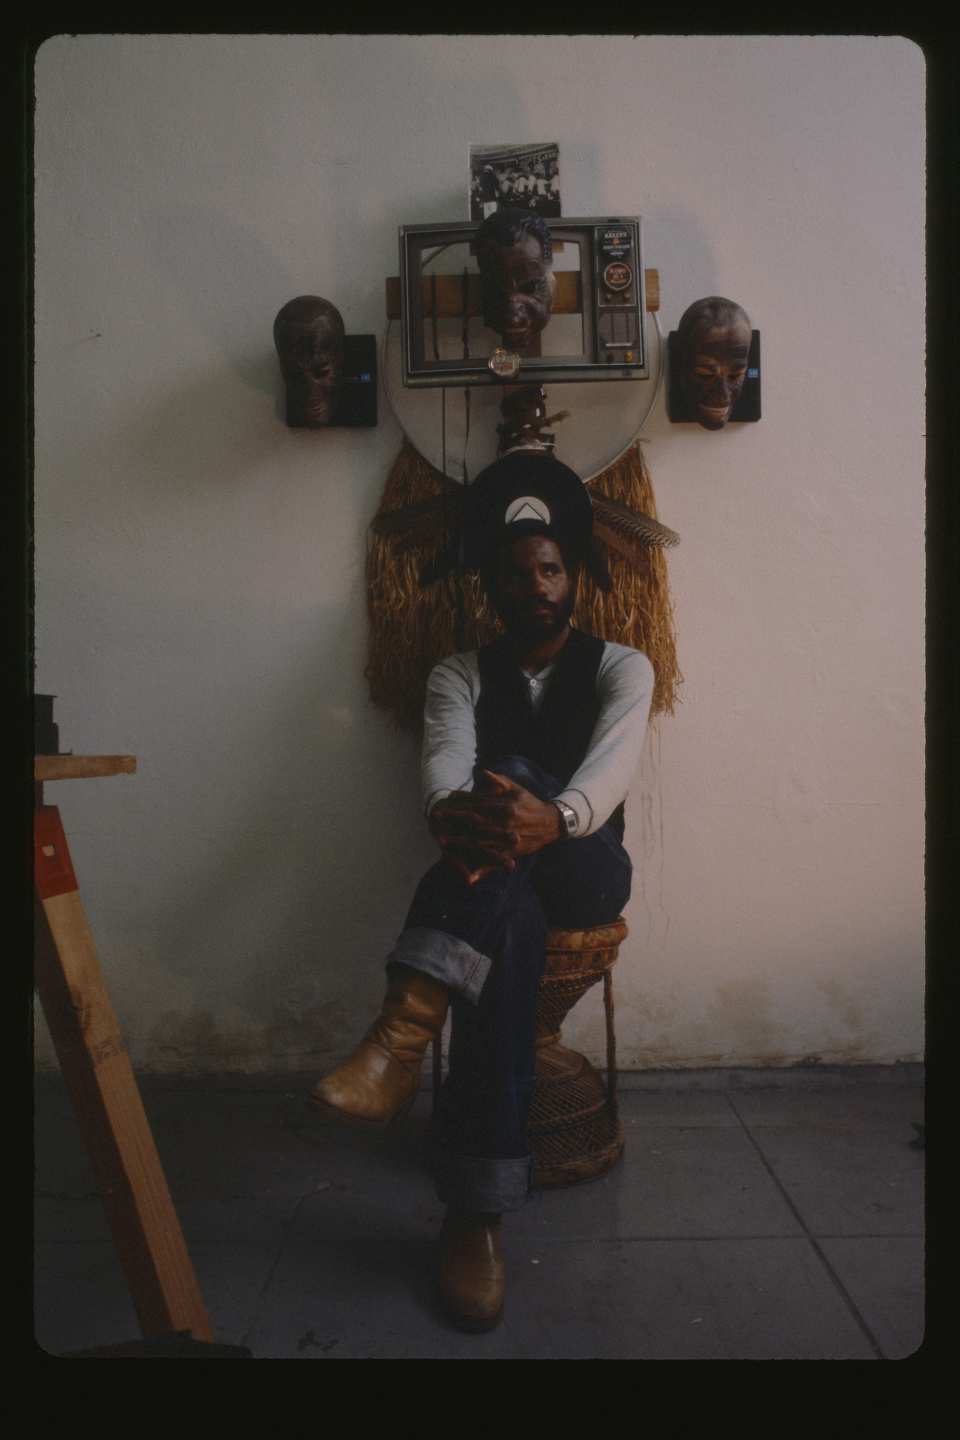 Ulysses Jenkins in studio circa 1983. The artist sits with their legs crossed in front of a complex piece of work.